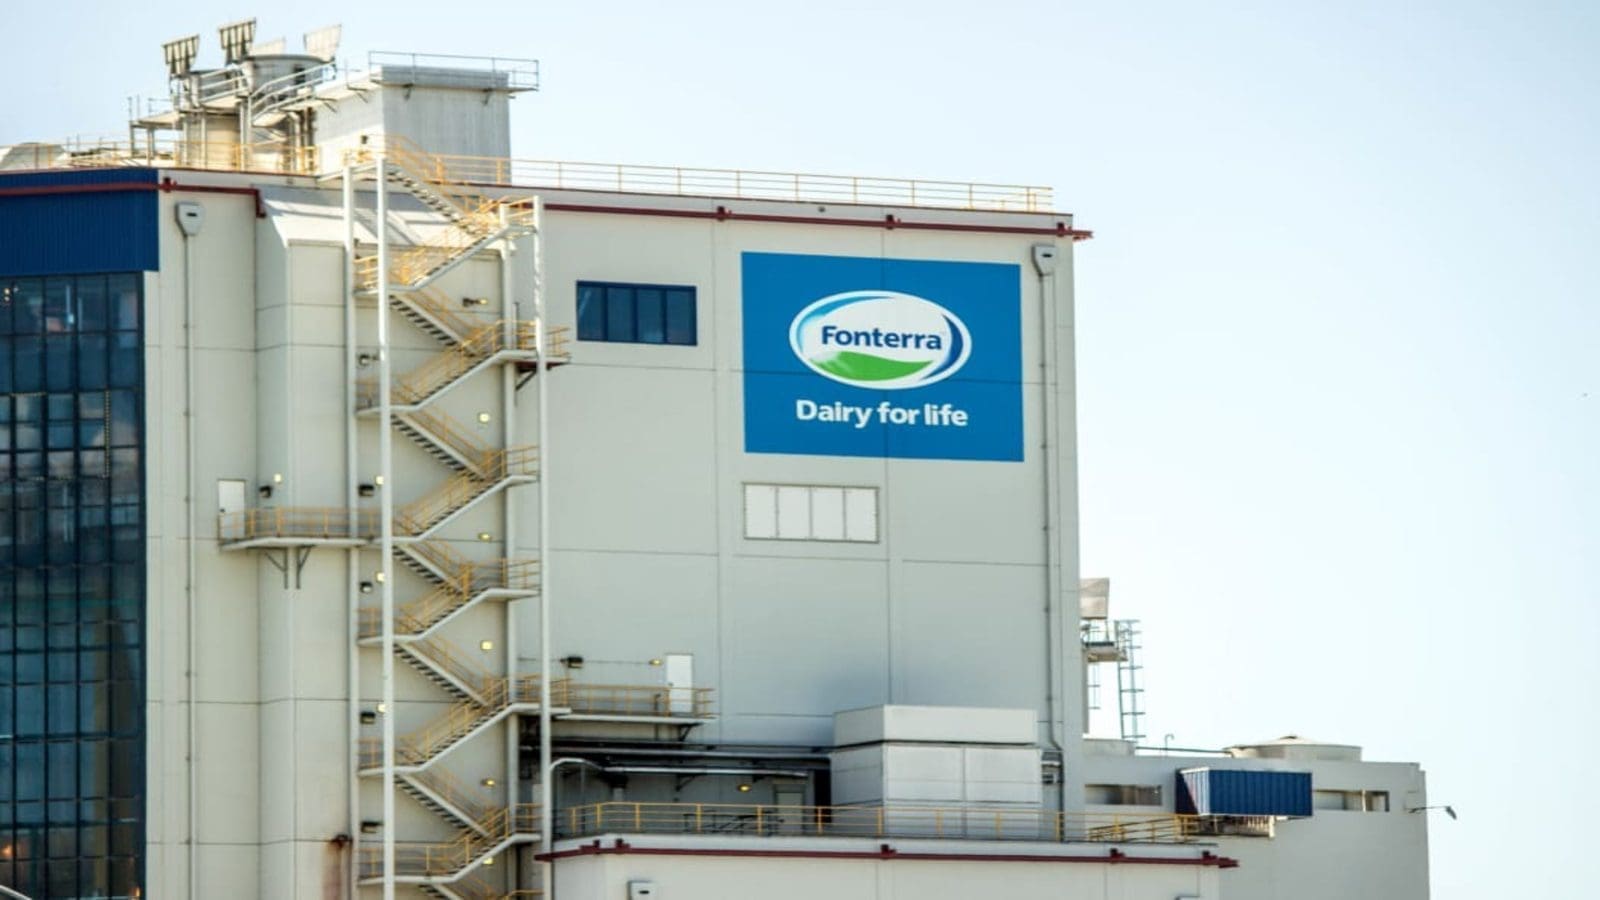 Fonterra to end Brightwater plant operations in 2023, shift to Darfield site